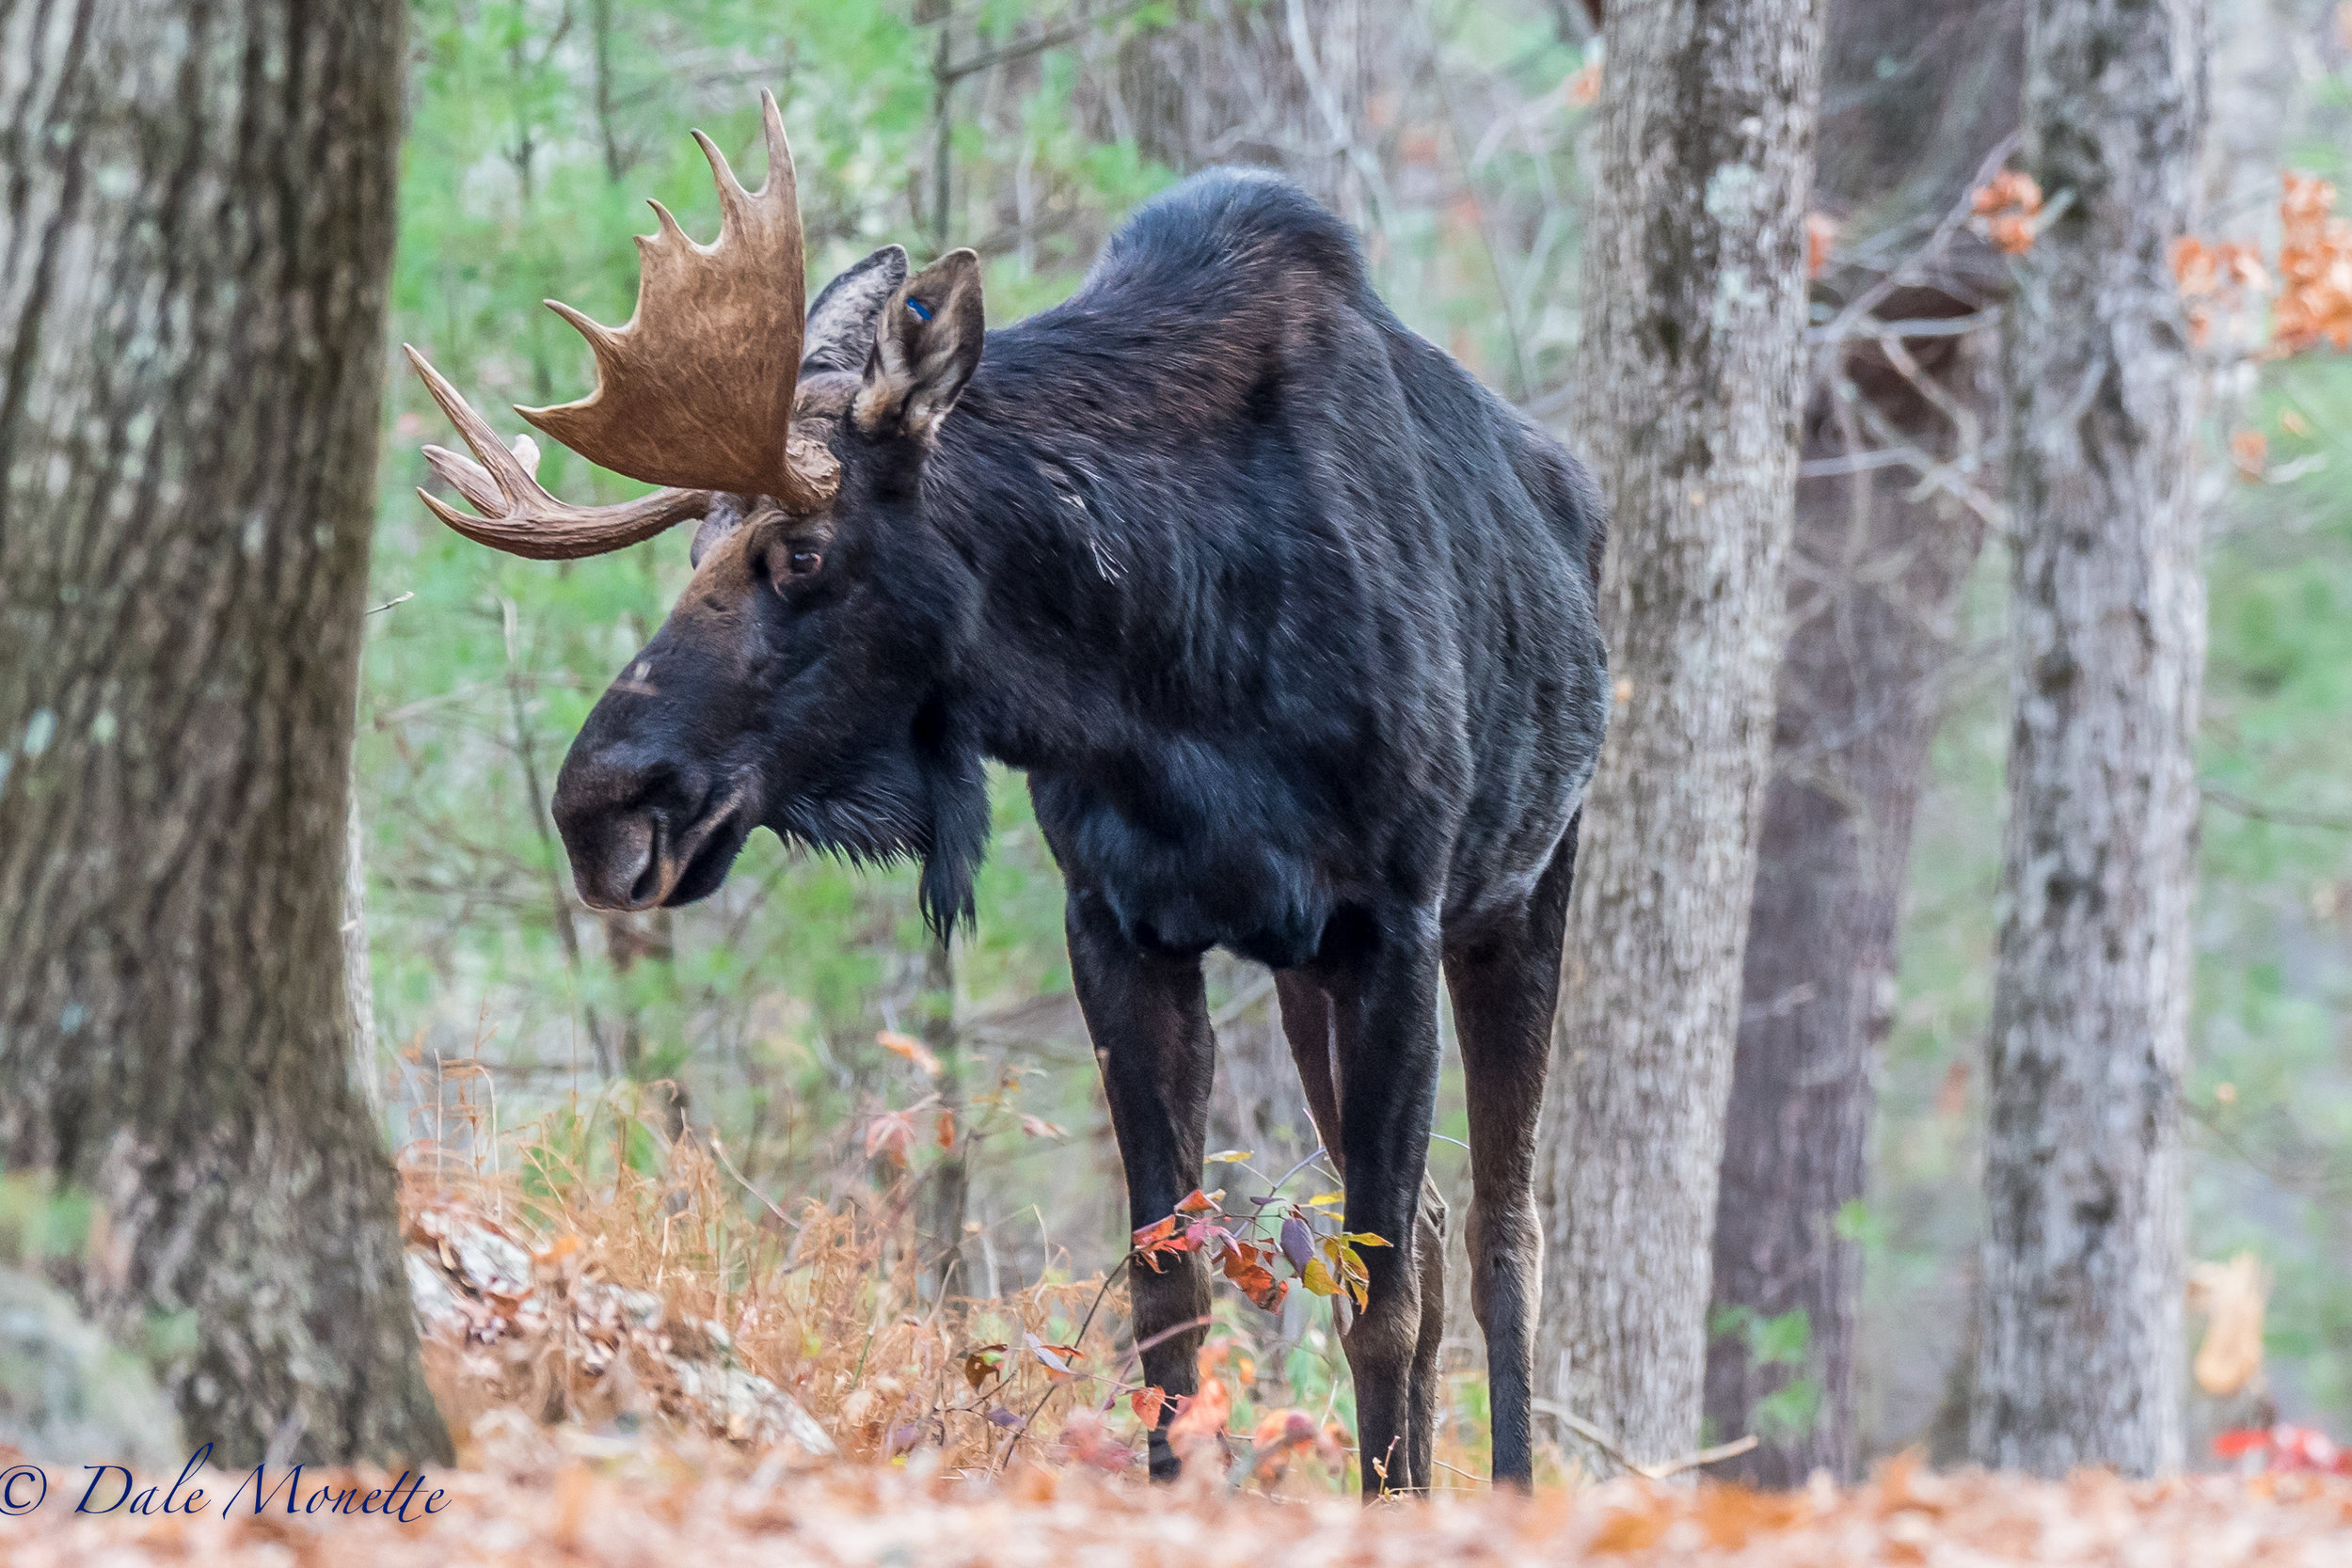   For the 3rd year in a row I've bumped into this moose at Quabbin. He's got a very distinct pair of antlers. &nbsp;Masswildlife had a radio collar on him in 2007 and they told me he could now be 12 or 13 years old. &nbsp;He was 1/2 mile from where I